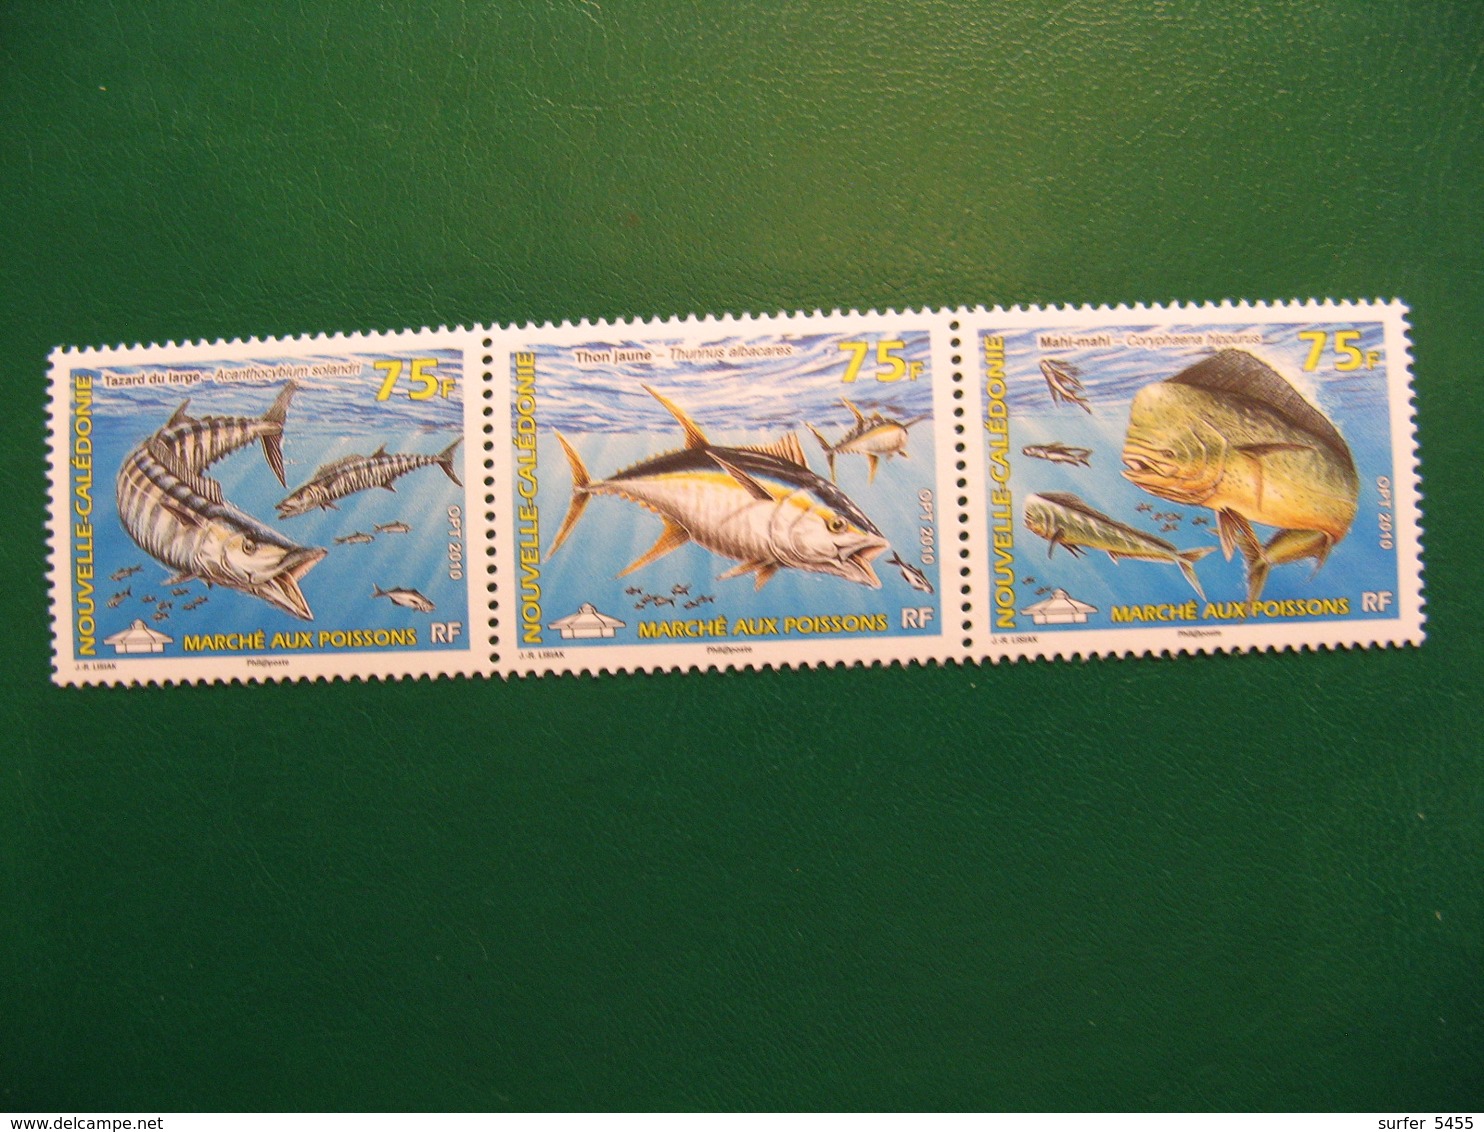 NOUVELLE CALEDONIE YVERT POSTE ORDINAIRE N° 1096/1098 NEUFS** LUXE - MNH - FACIALE 1,89 EURO - Unused Stamps